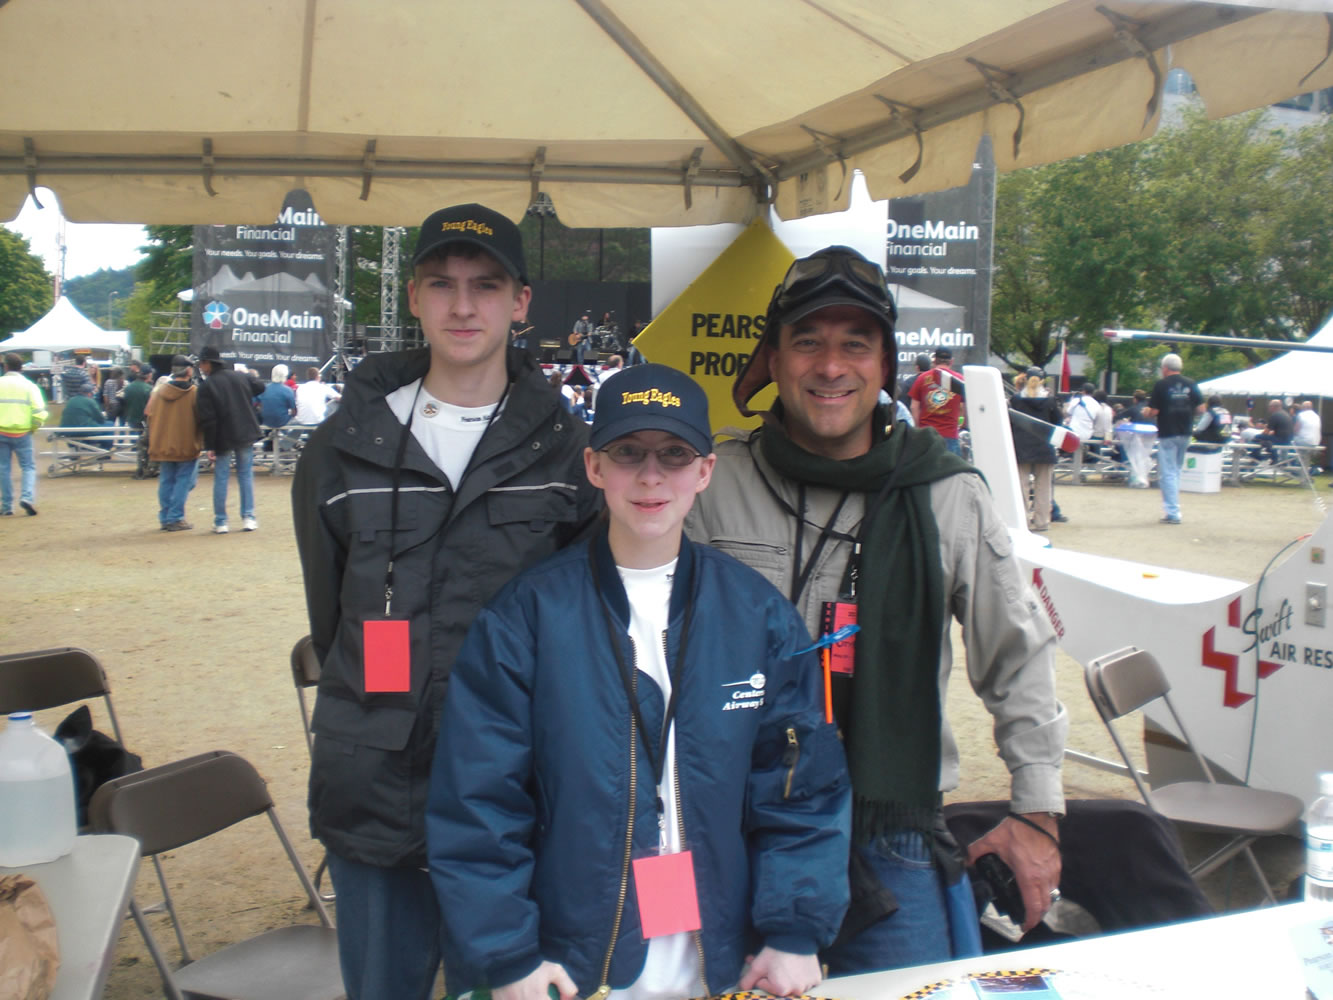 Inga Galbraith
From left, Kjer Galbraith and Kaya Galbraith, and Pearson Air Museum manager Laureano Mier at the Memorial Day Parade in Portland in 2012.